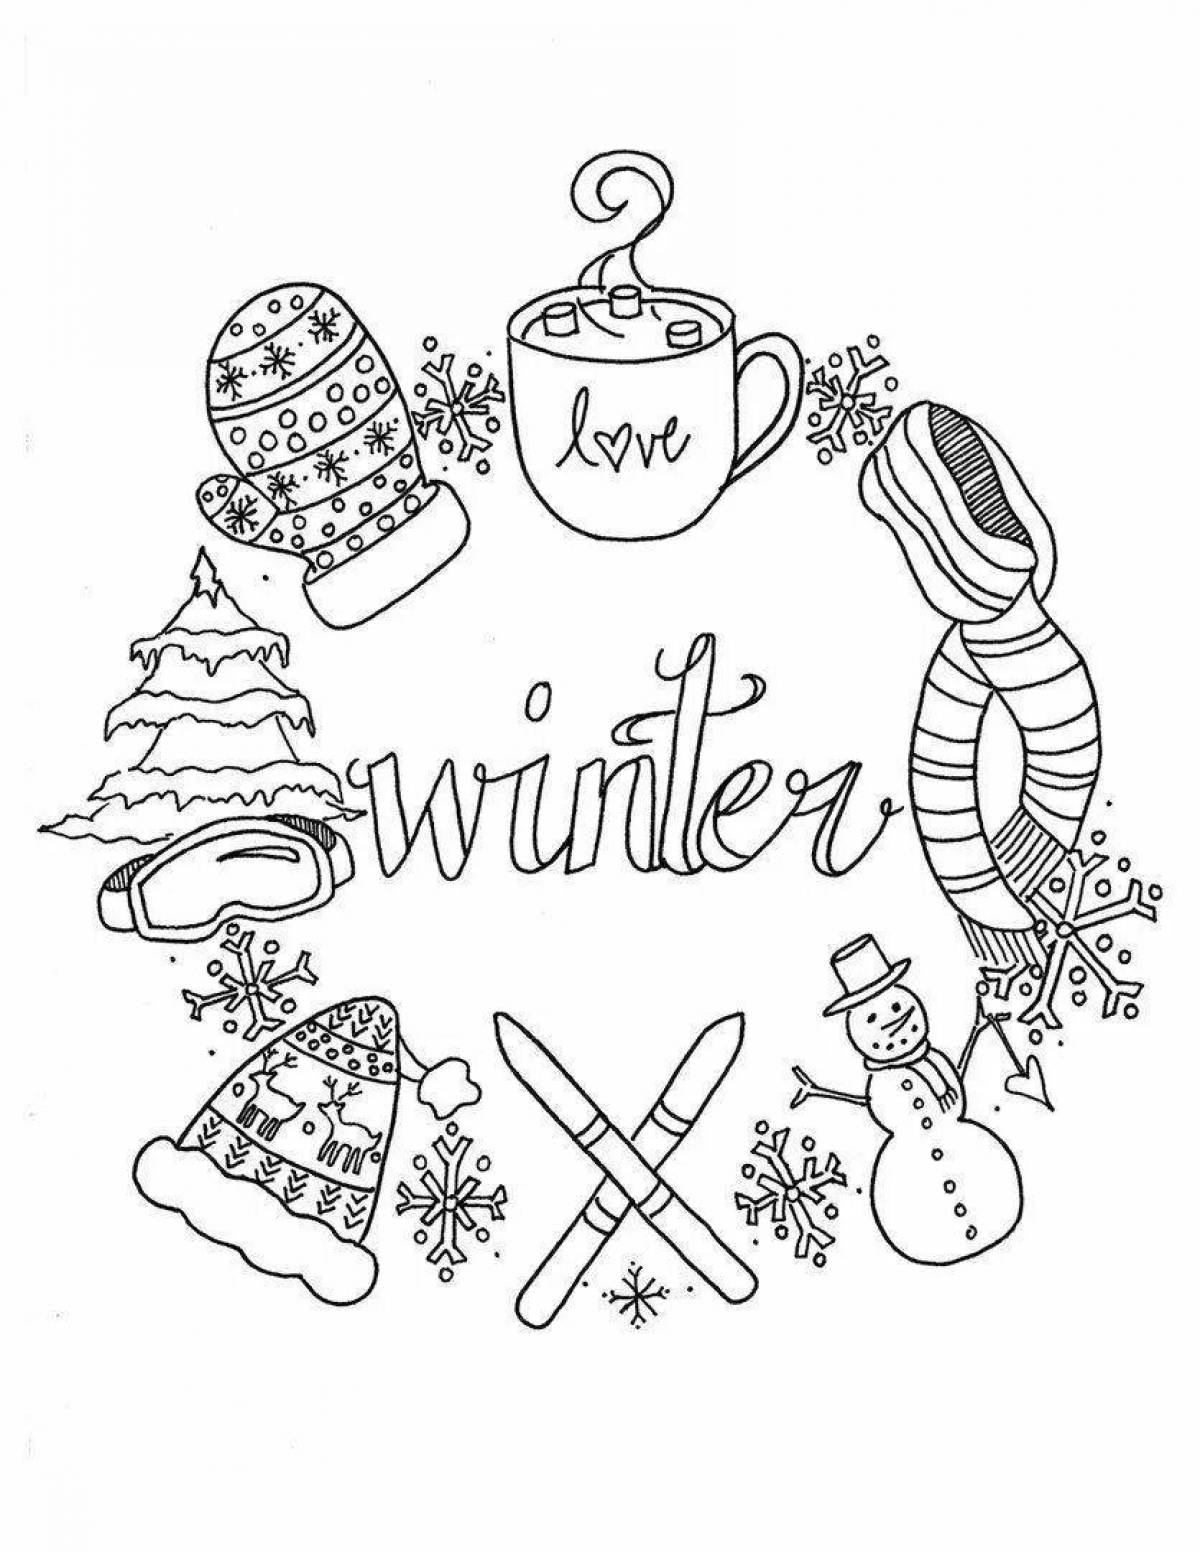 A fascinating Christmas coloring book for Vkusvill